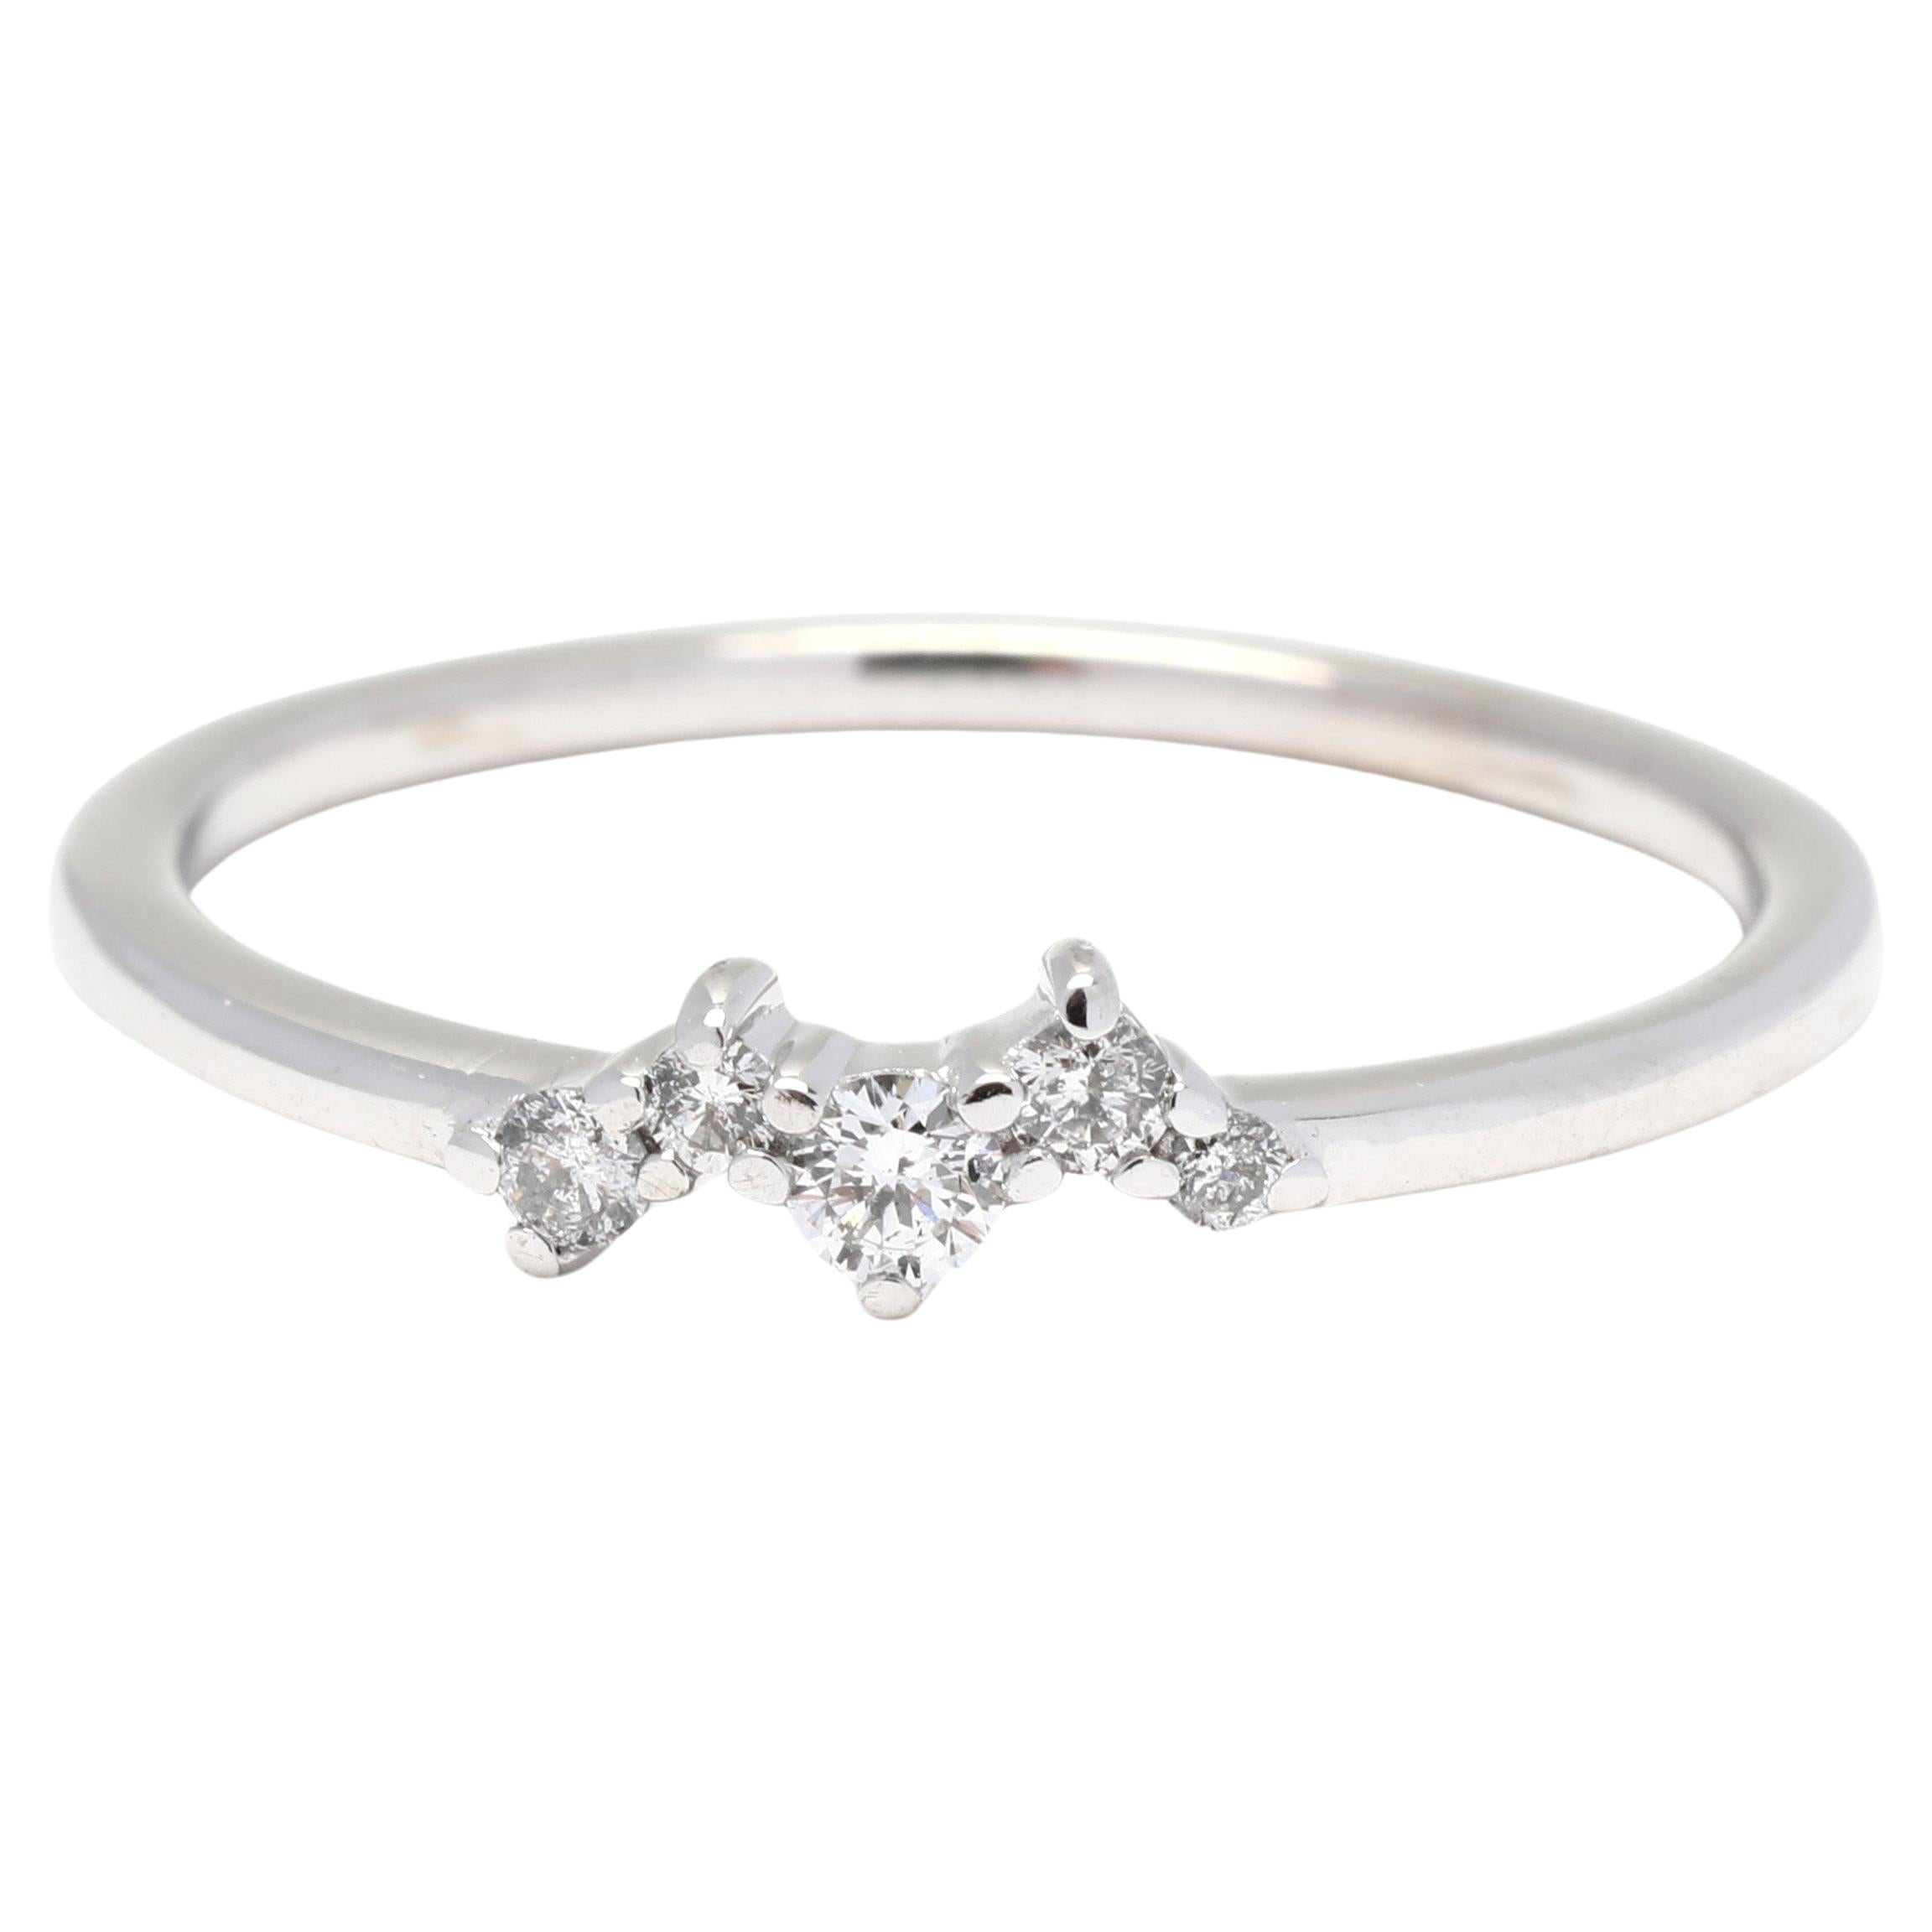 0.10ctw Diamond Scattered Band, 10K White Gold, Ring Size 6.75, Dainty Ring